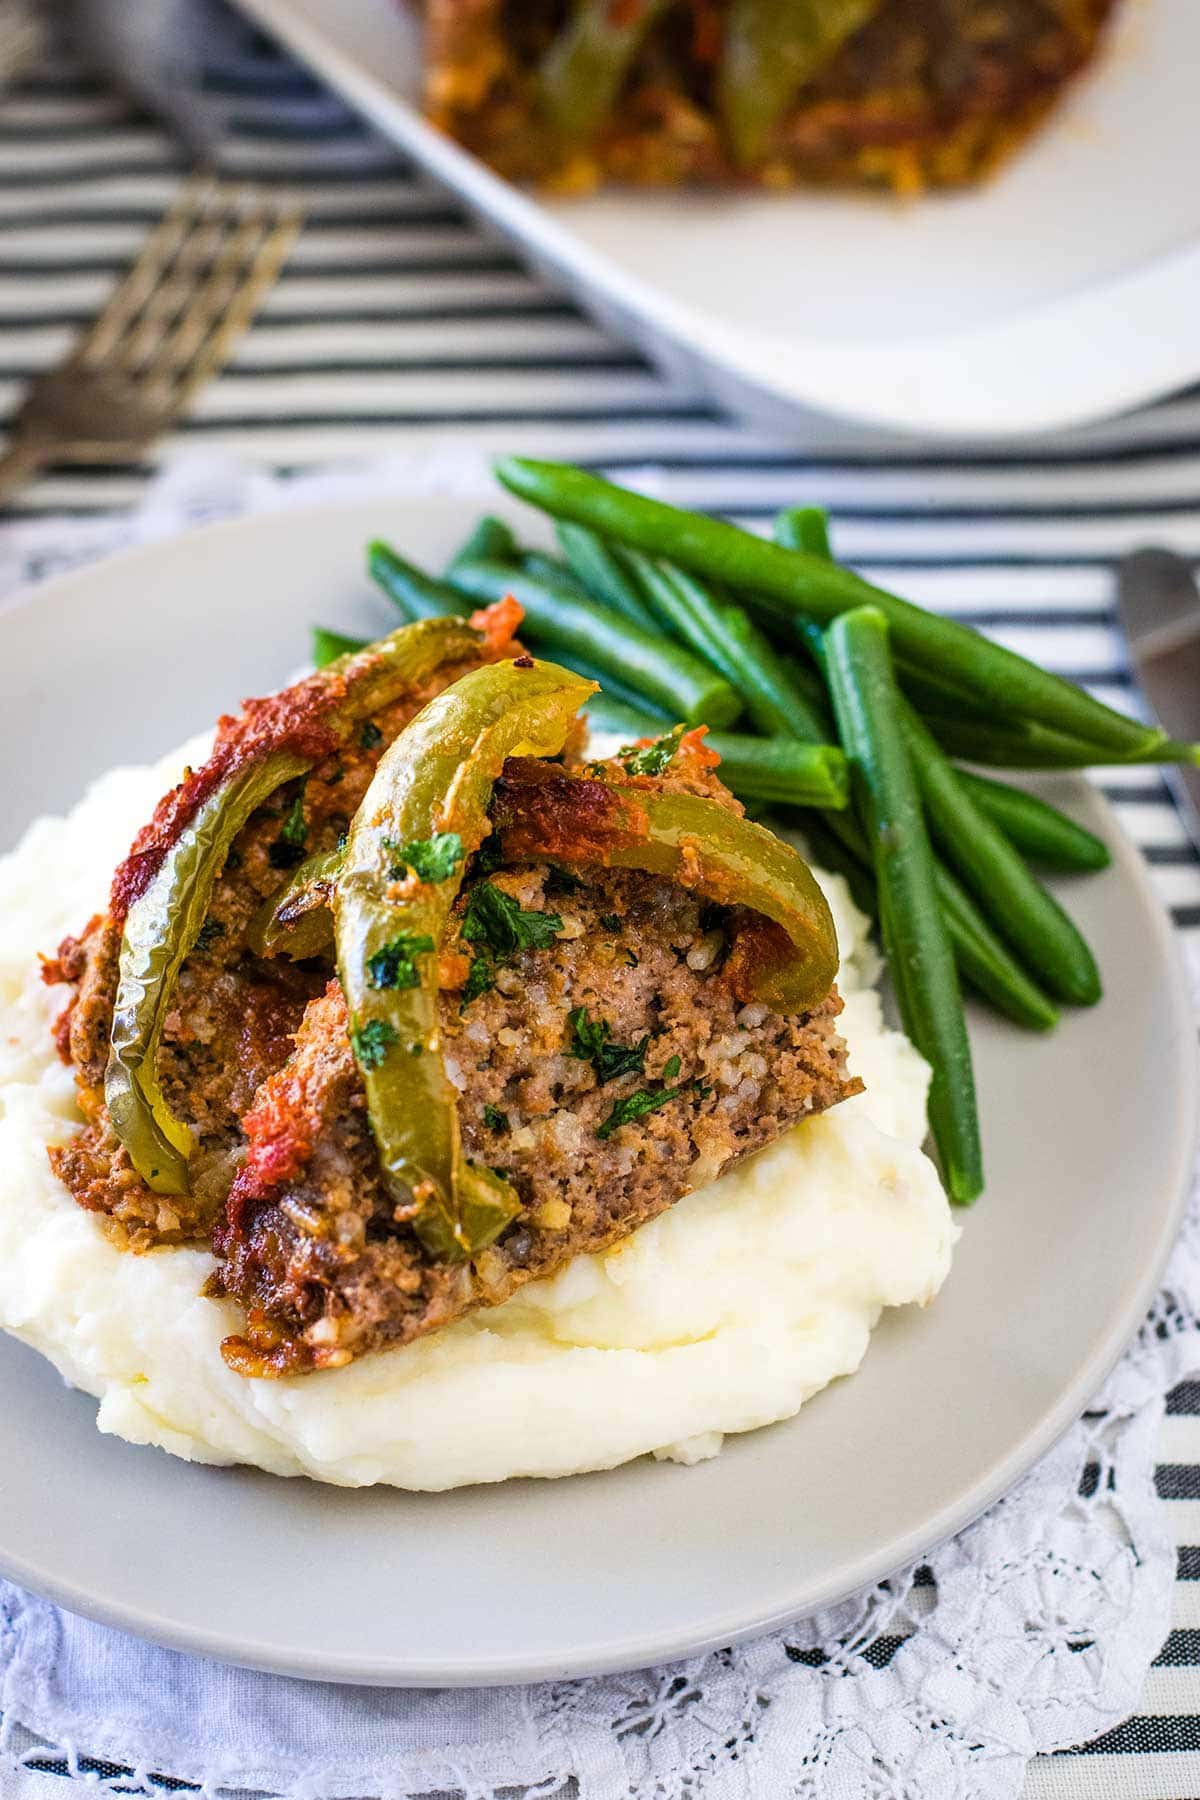 Meatloaf topped with peppers and tomatoes on a bed of mashed potatoes and a side of green beans.